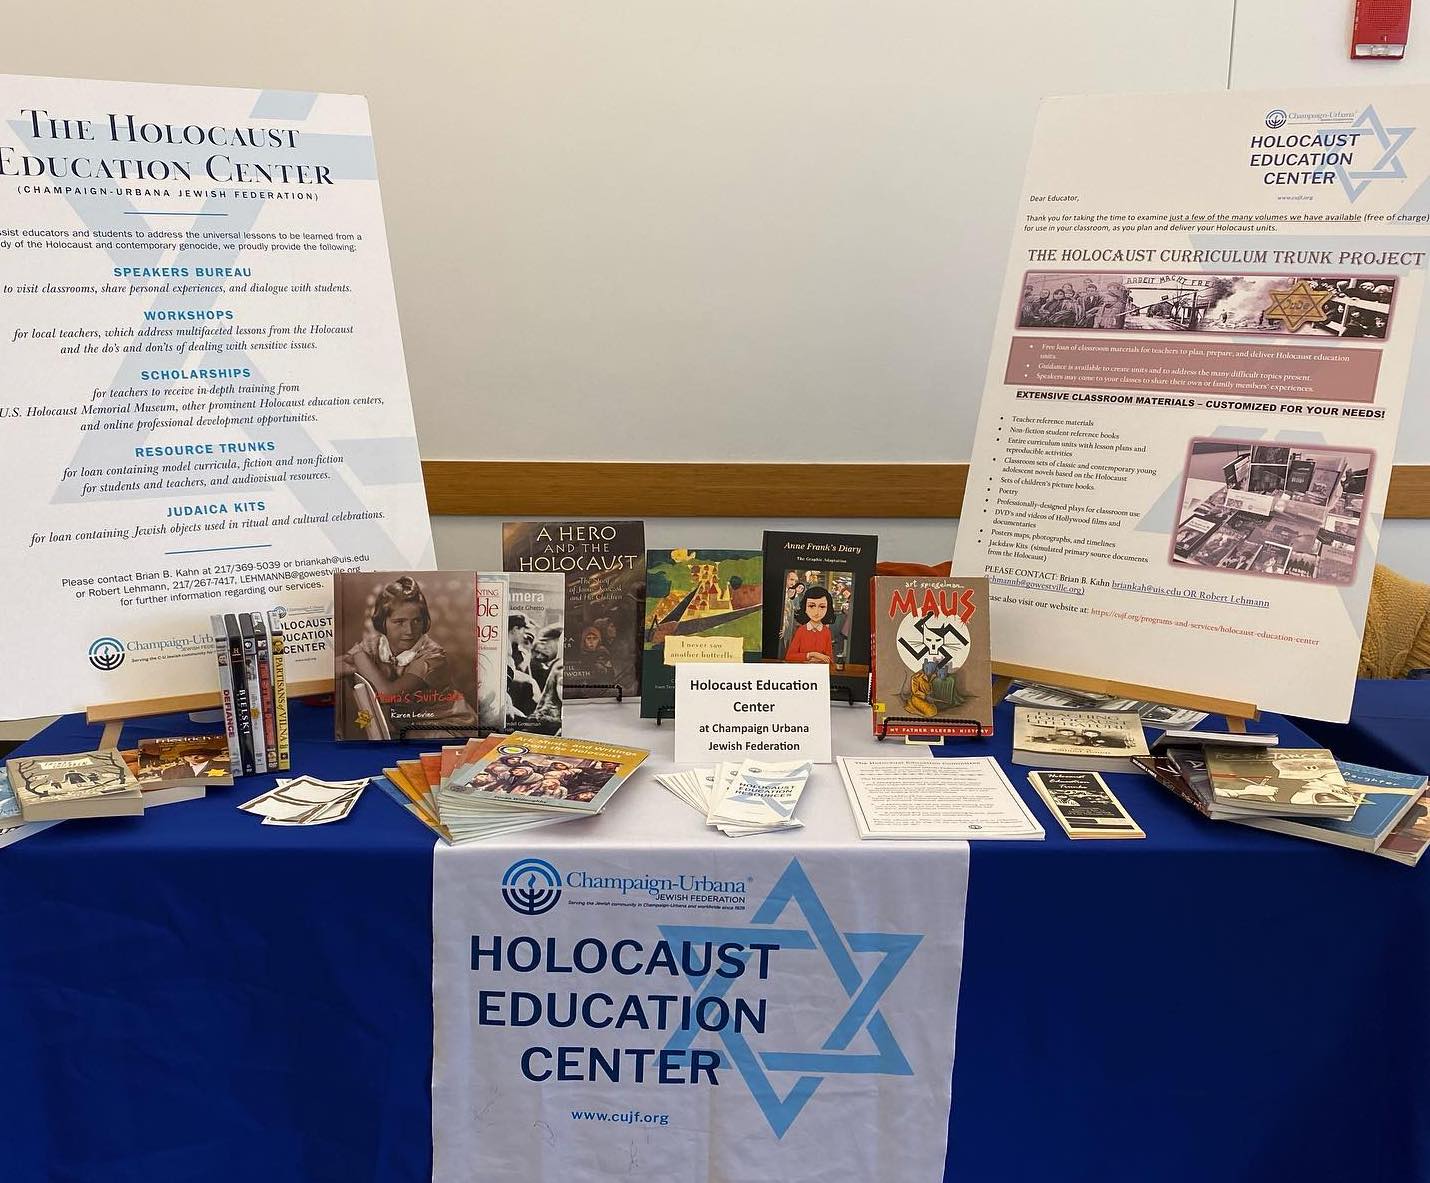 Courage to Remember: The Holocaust, 1939-45 Traveling Exhibit is coming to Champaign-Urbana